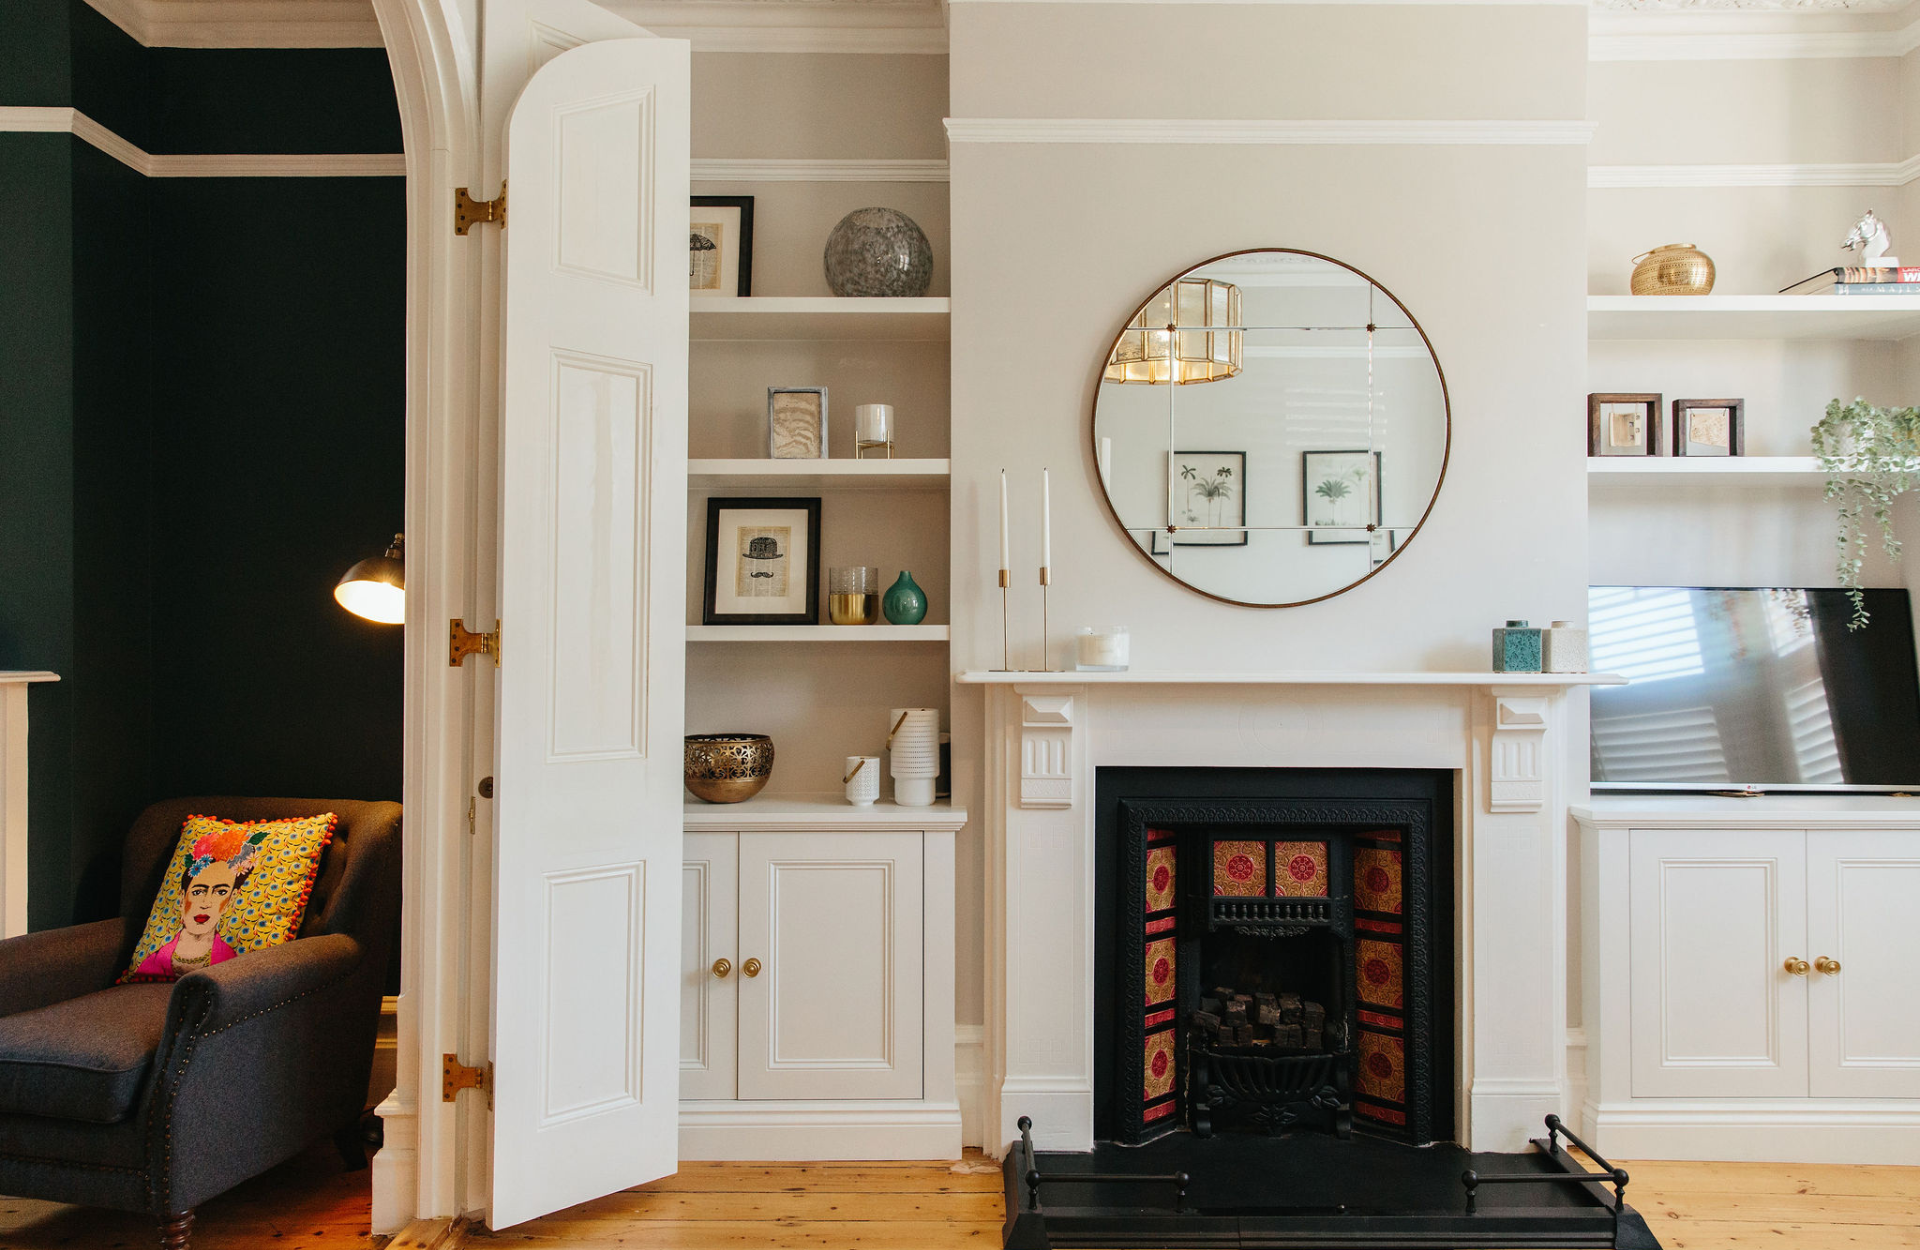 A wall with a chimney breast and round mirror above fire place